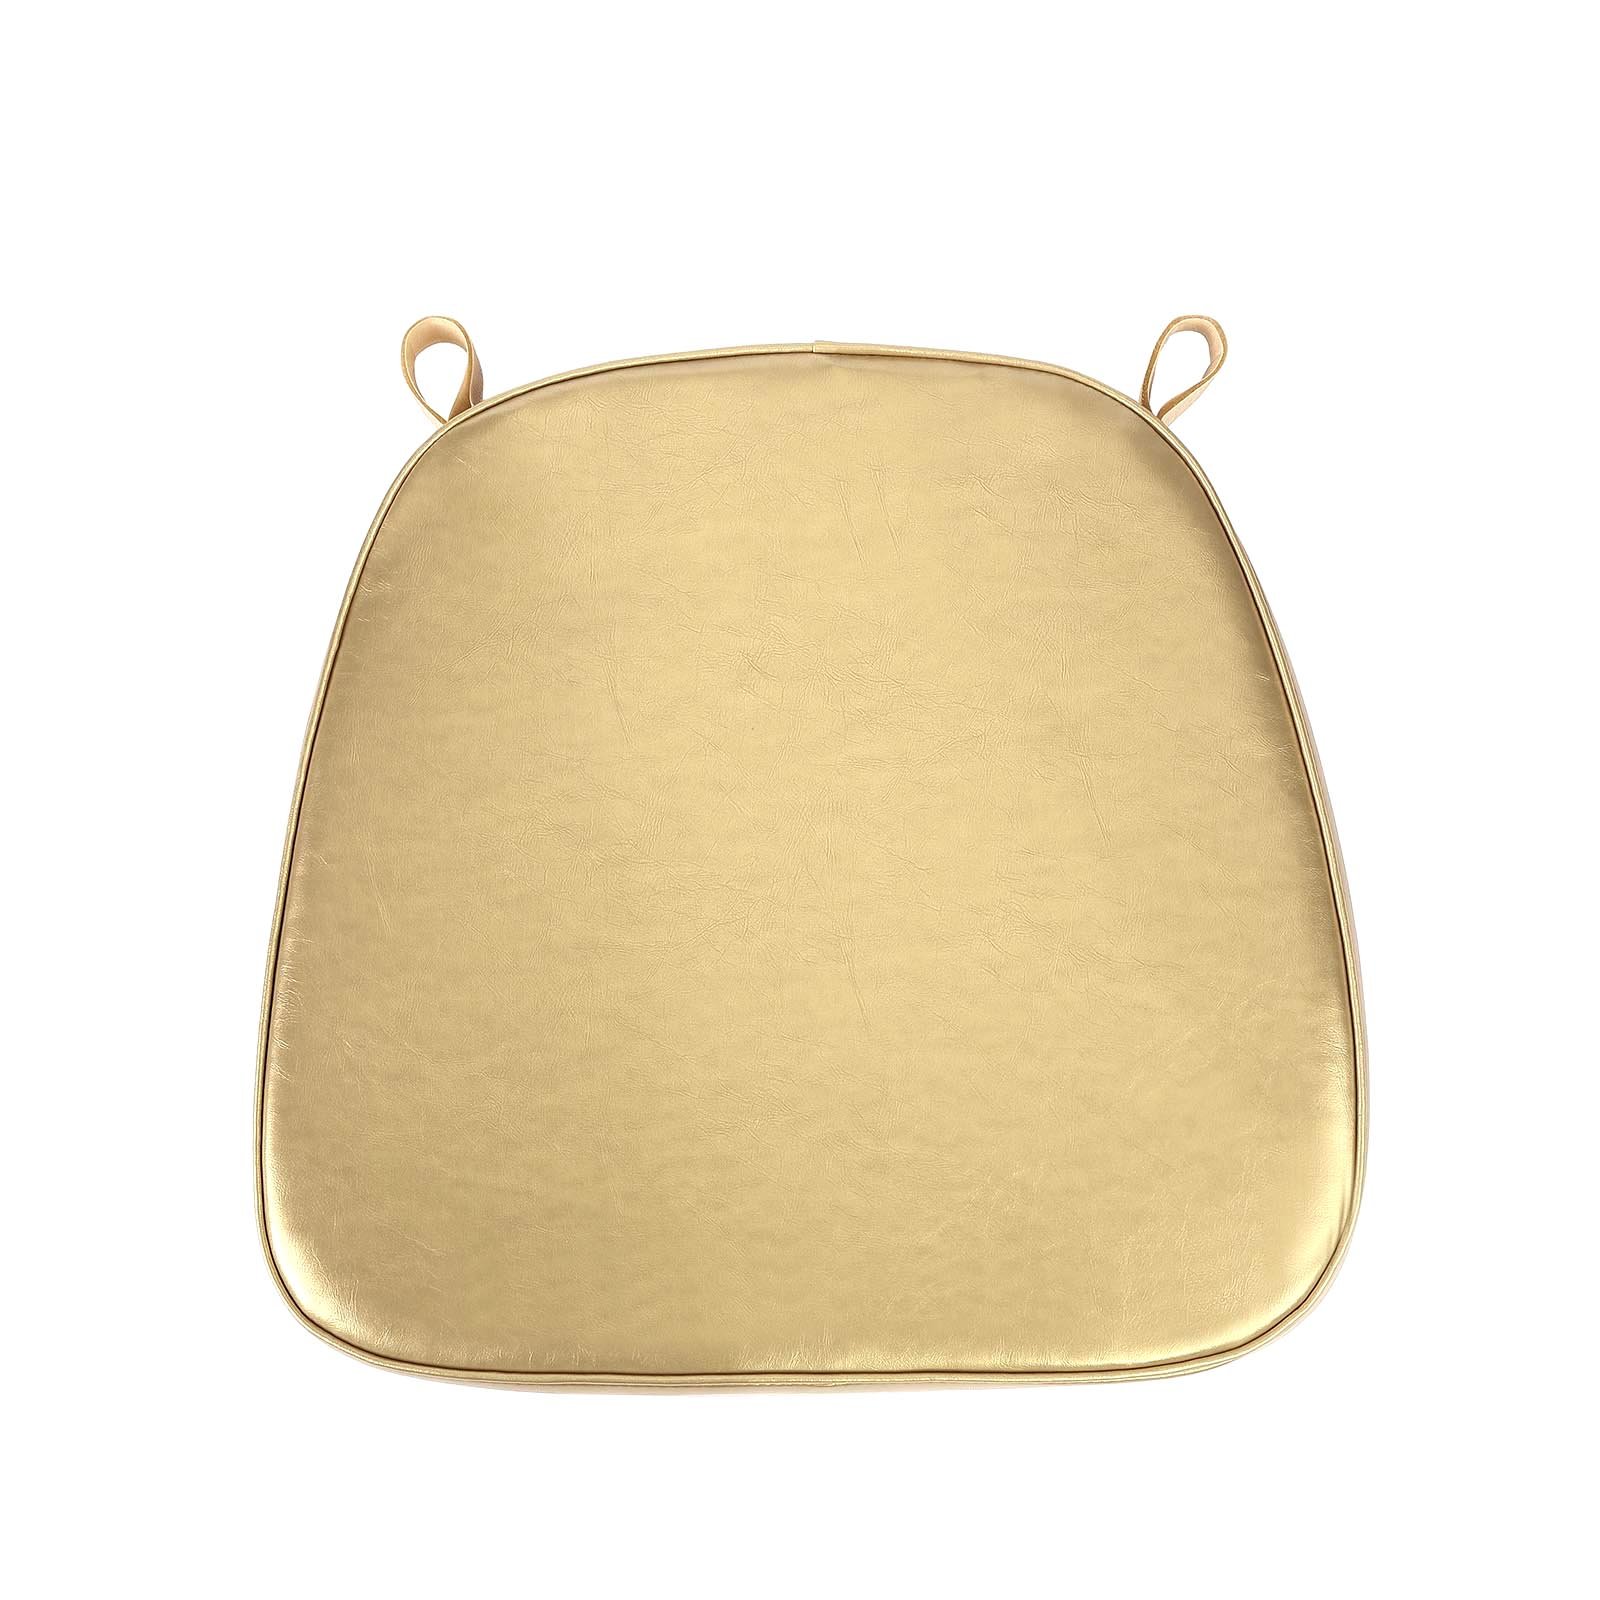 Buy 2 Thick Chair Pad, Metallic Gold